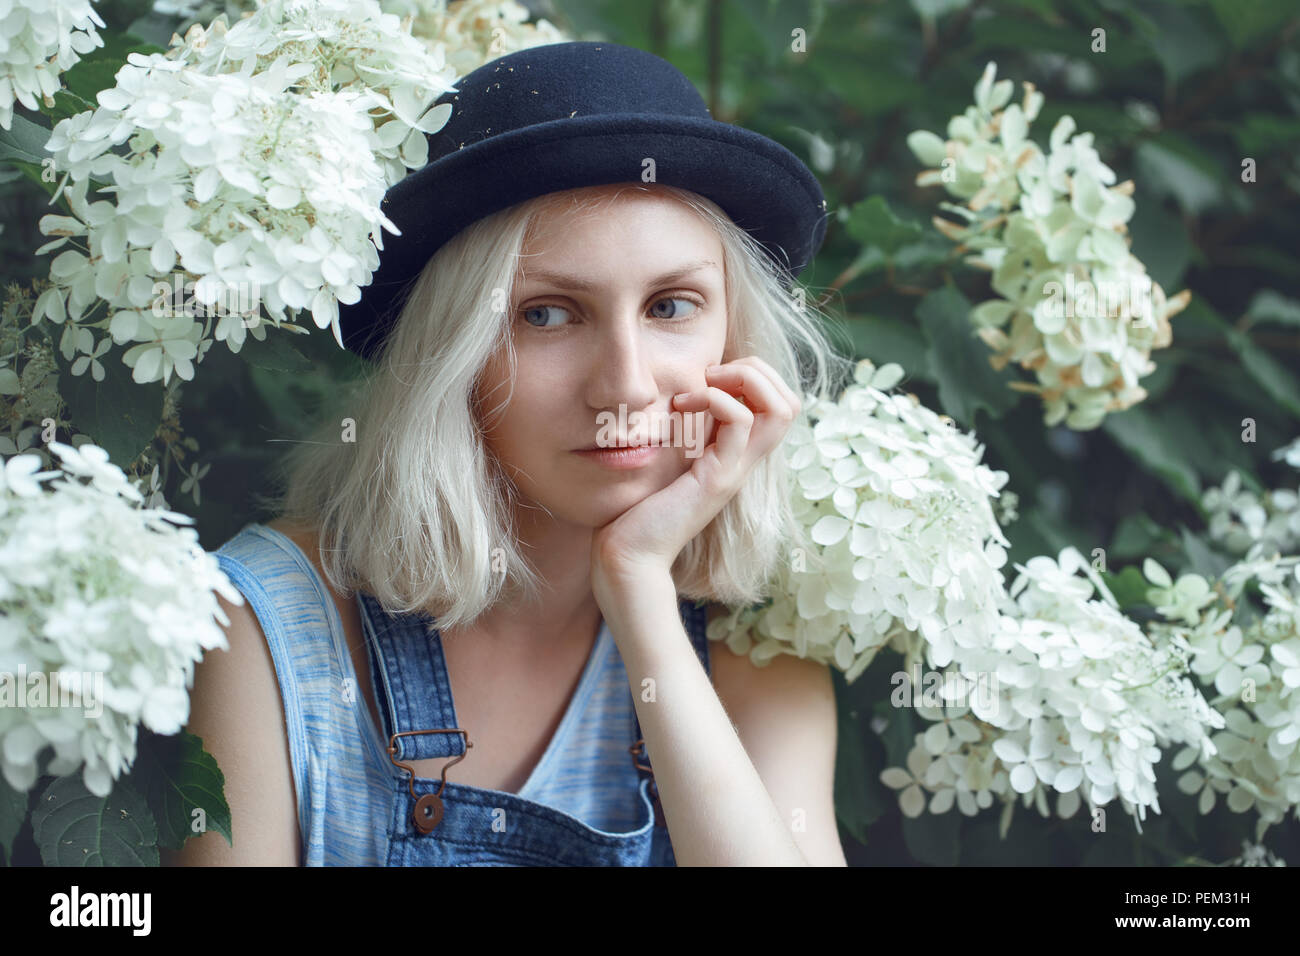 Closeup portrait of beautiful Caucasian teenage young blonde model girl woman in blue tshirt, jeans romper, black hat, sitting among large white flowe Stock Photo